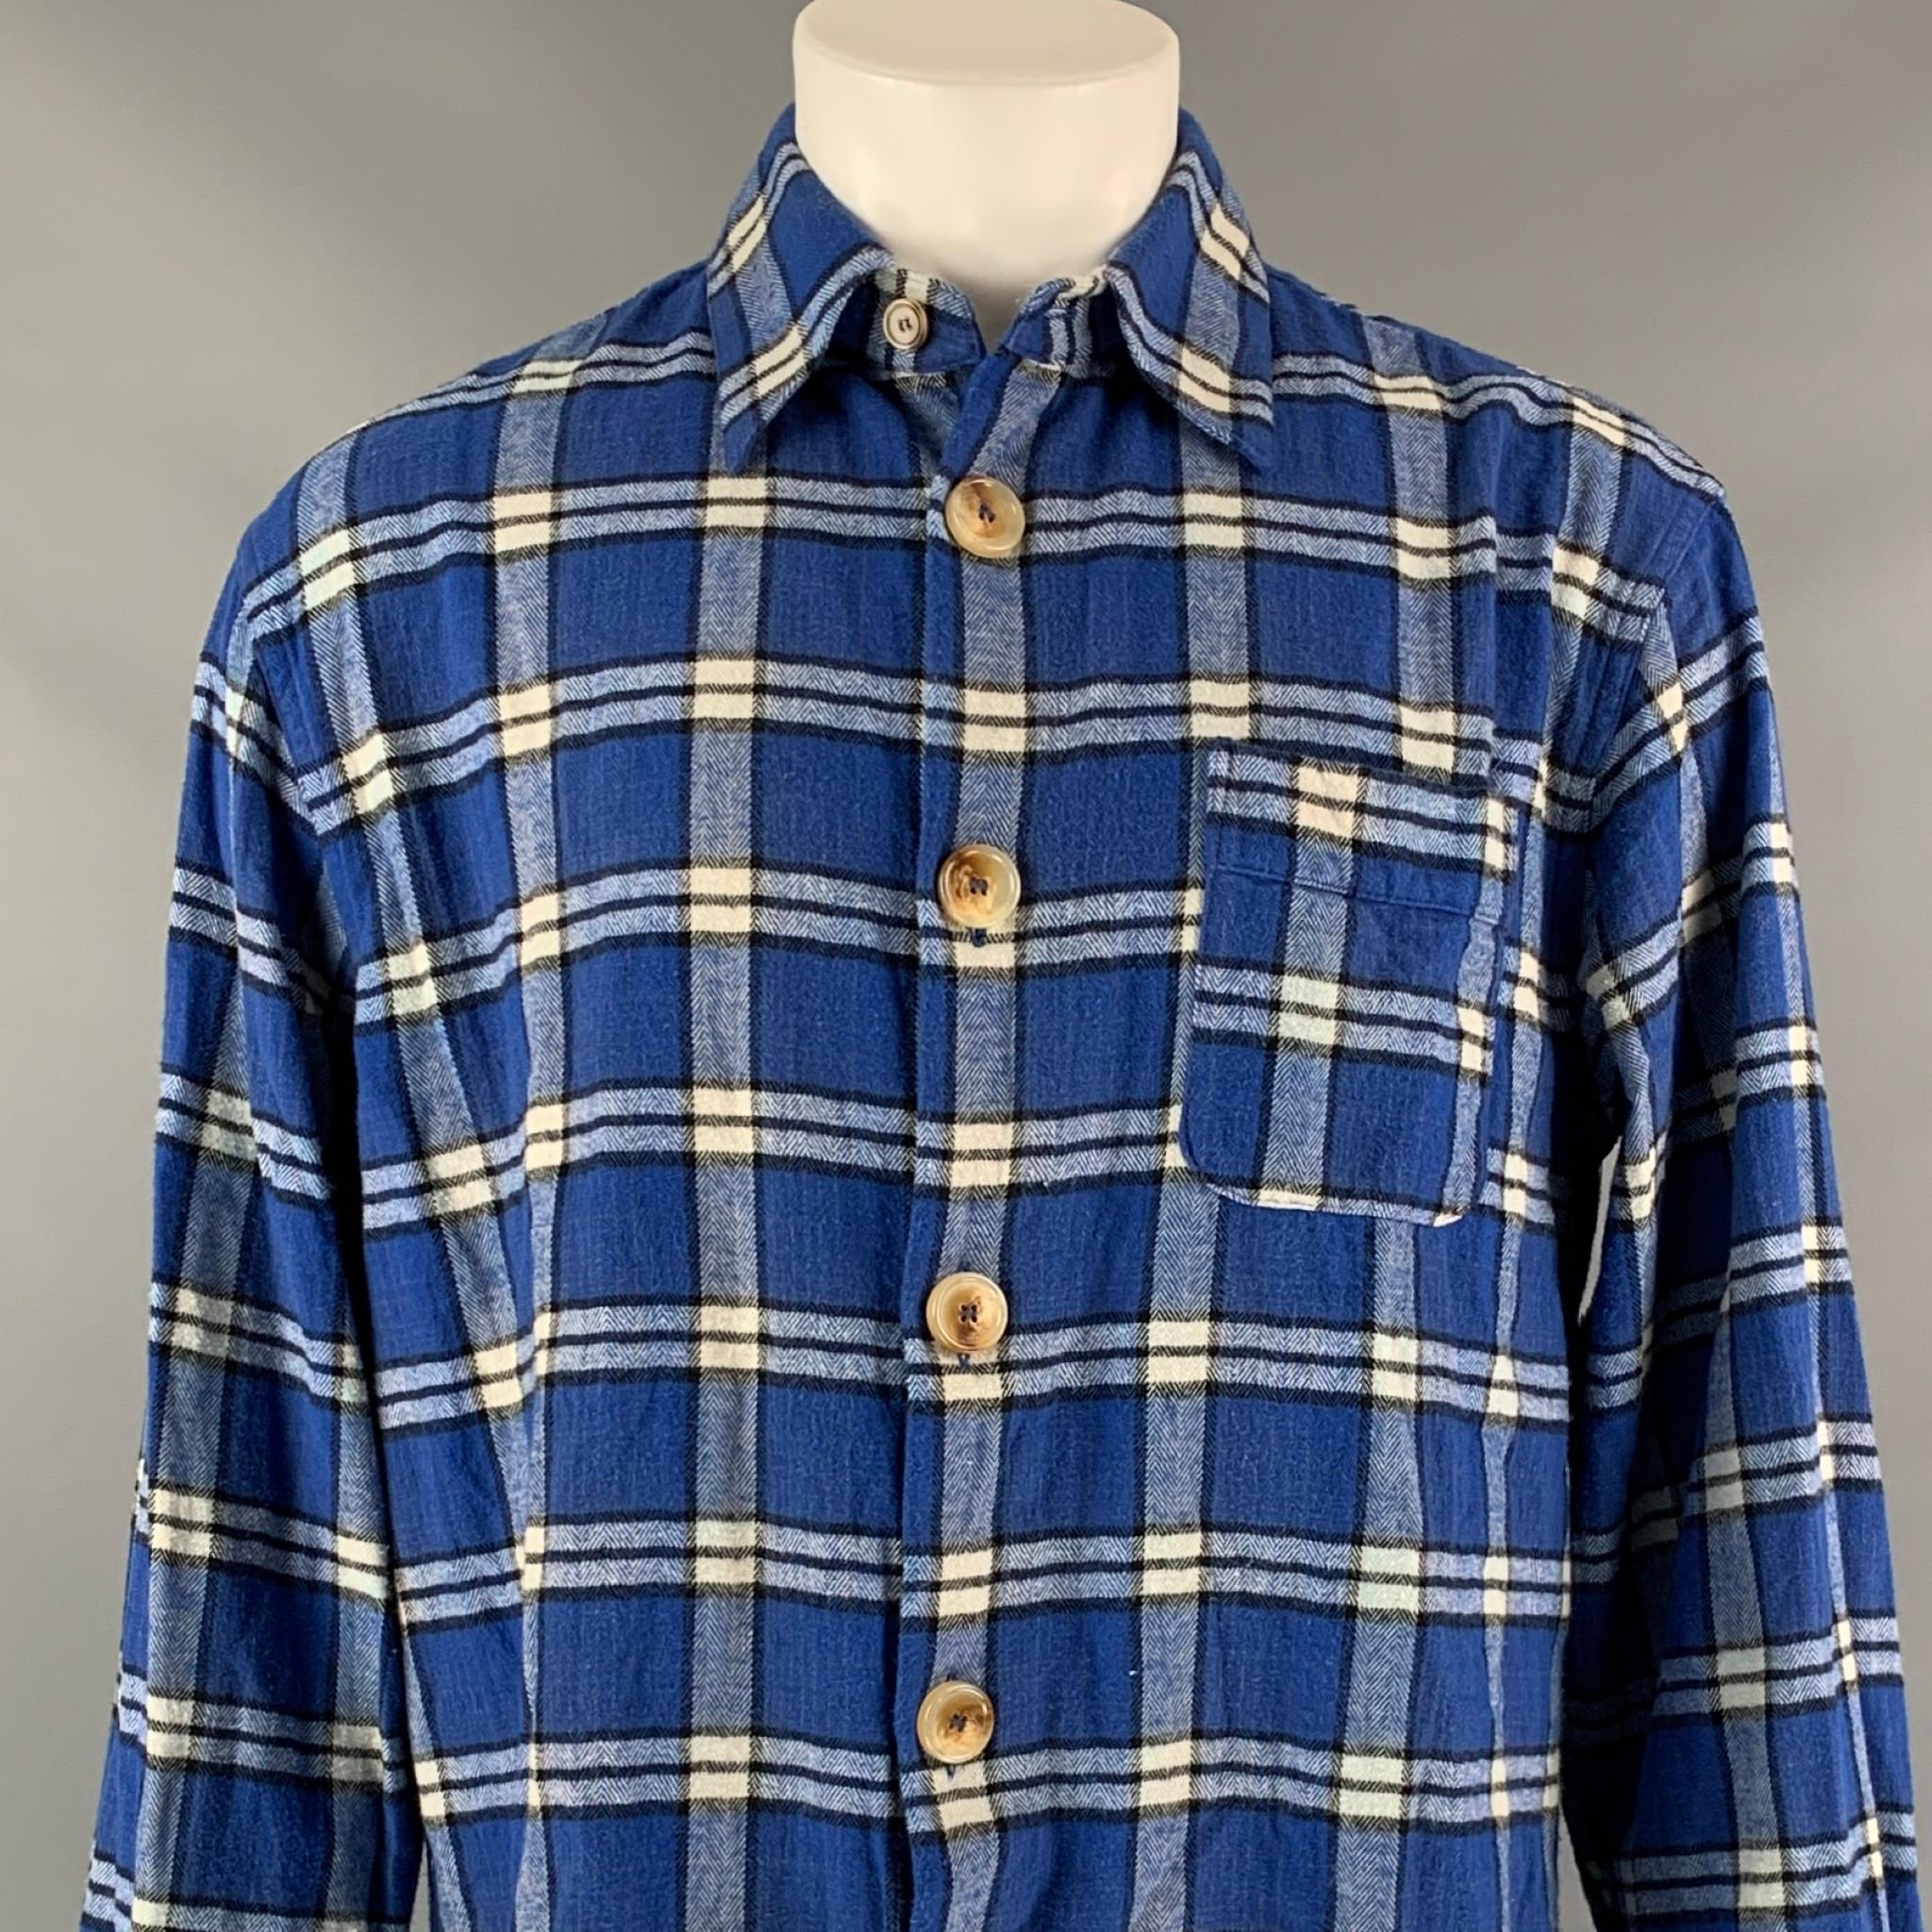 MARNI long sleeve shirt comes in a blue & white brushed plaid cotton featuring a oversized fit, patch pocket, spread collar, and a buttoned closure. Made in Italy.

Very Good Pre-Owned Condition.
Marked: 46

Measurements:

Shoulder: 20 in.
Chest: 46